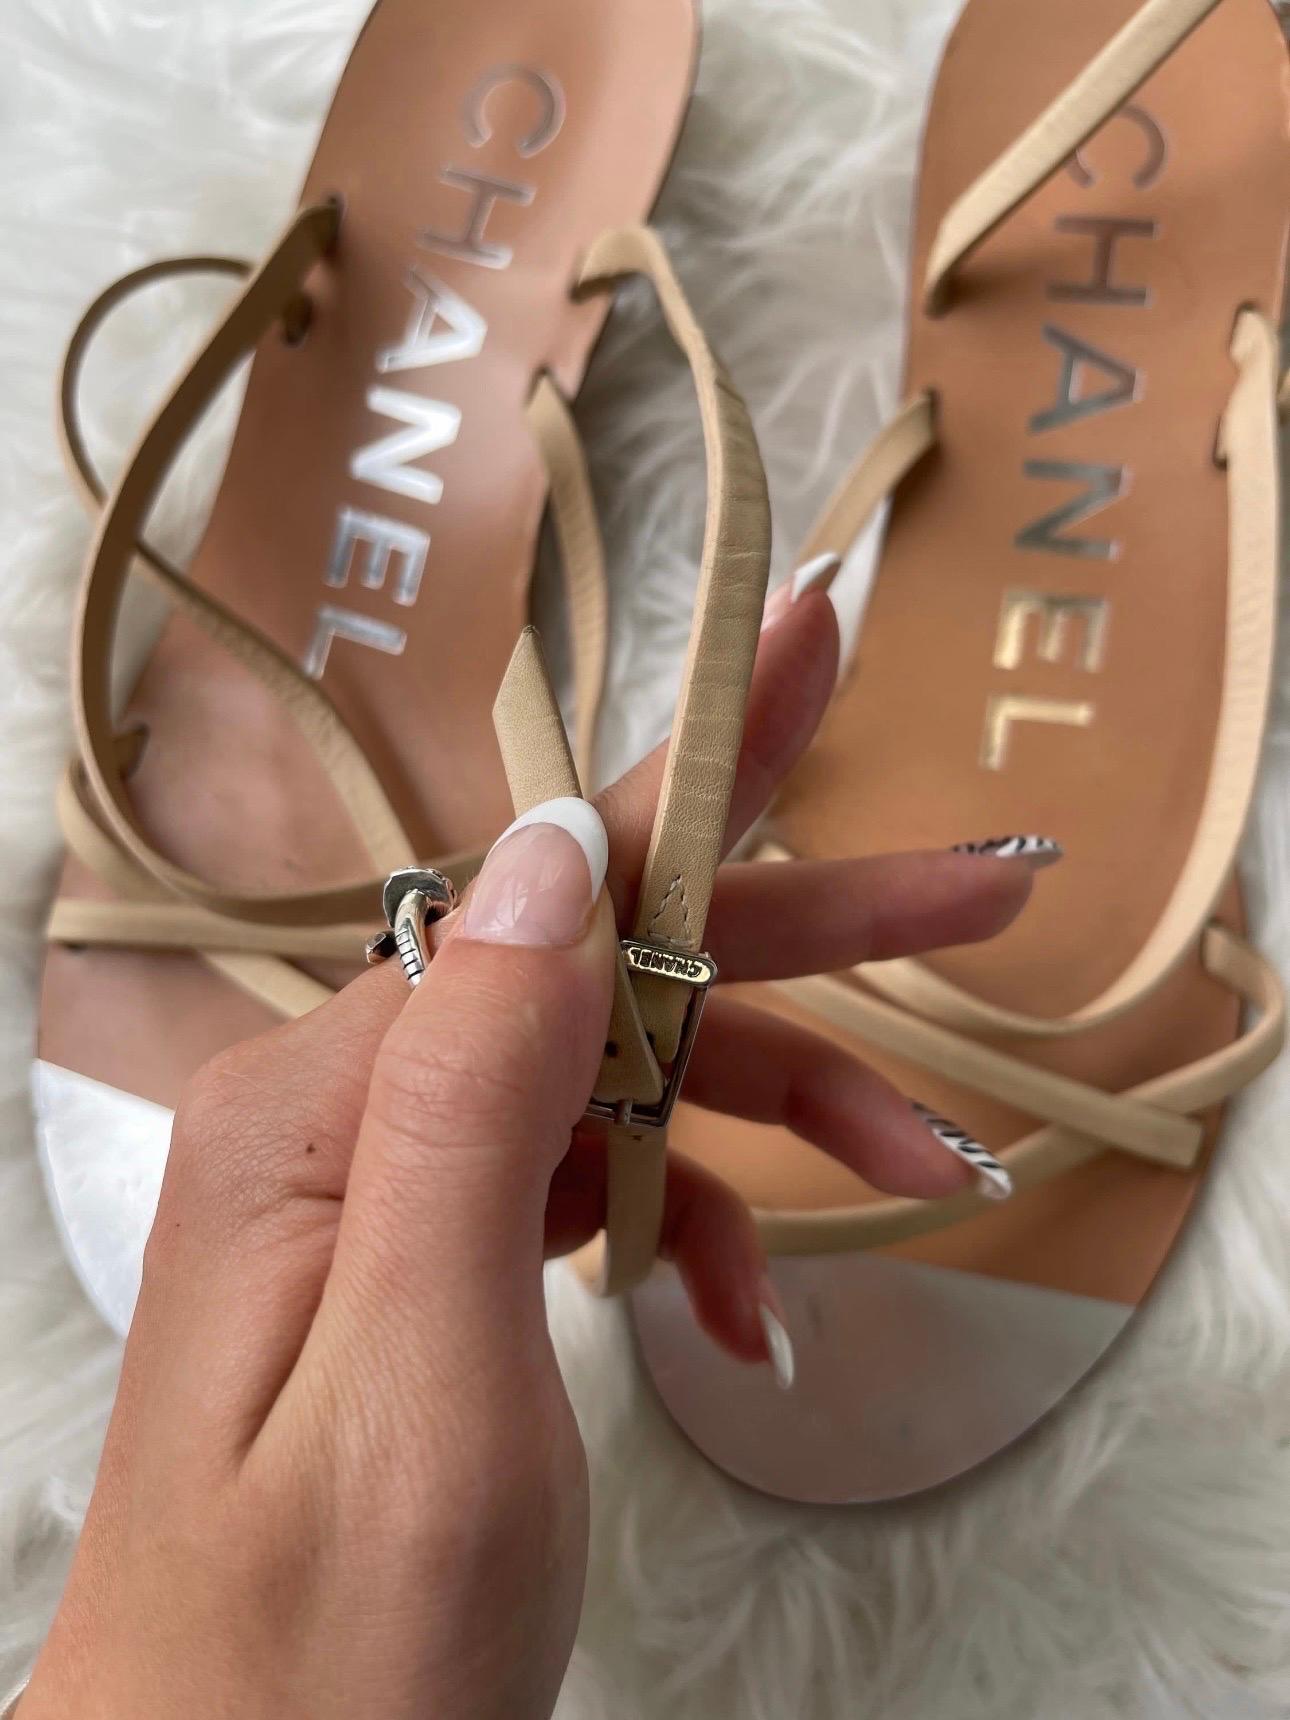 🖤 Chanel Leather Wedge Sandals 🖤

Nude leather Chanel wedge sandals, with silver-tone interlocking CC at wooden heel and buckle closure at ankles. 

Good condition. Moderate scuffs at soles; moderate wear at insoles; light creasing and wear to